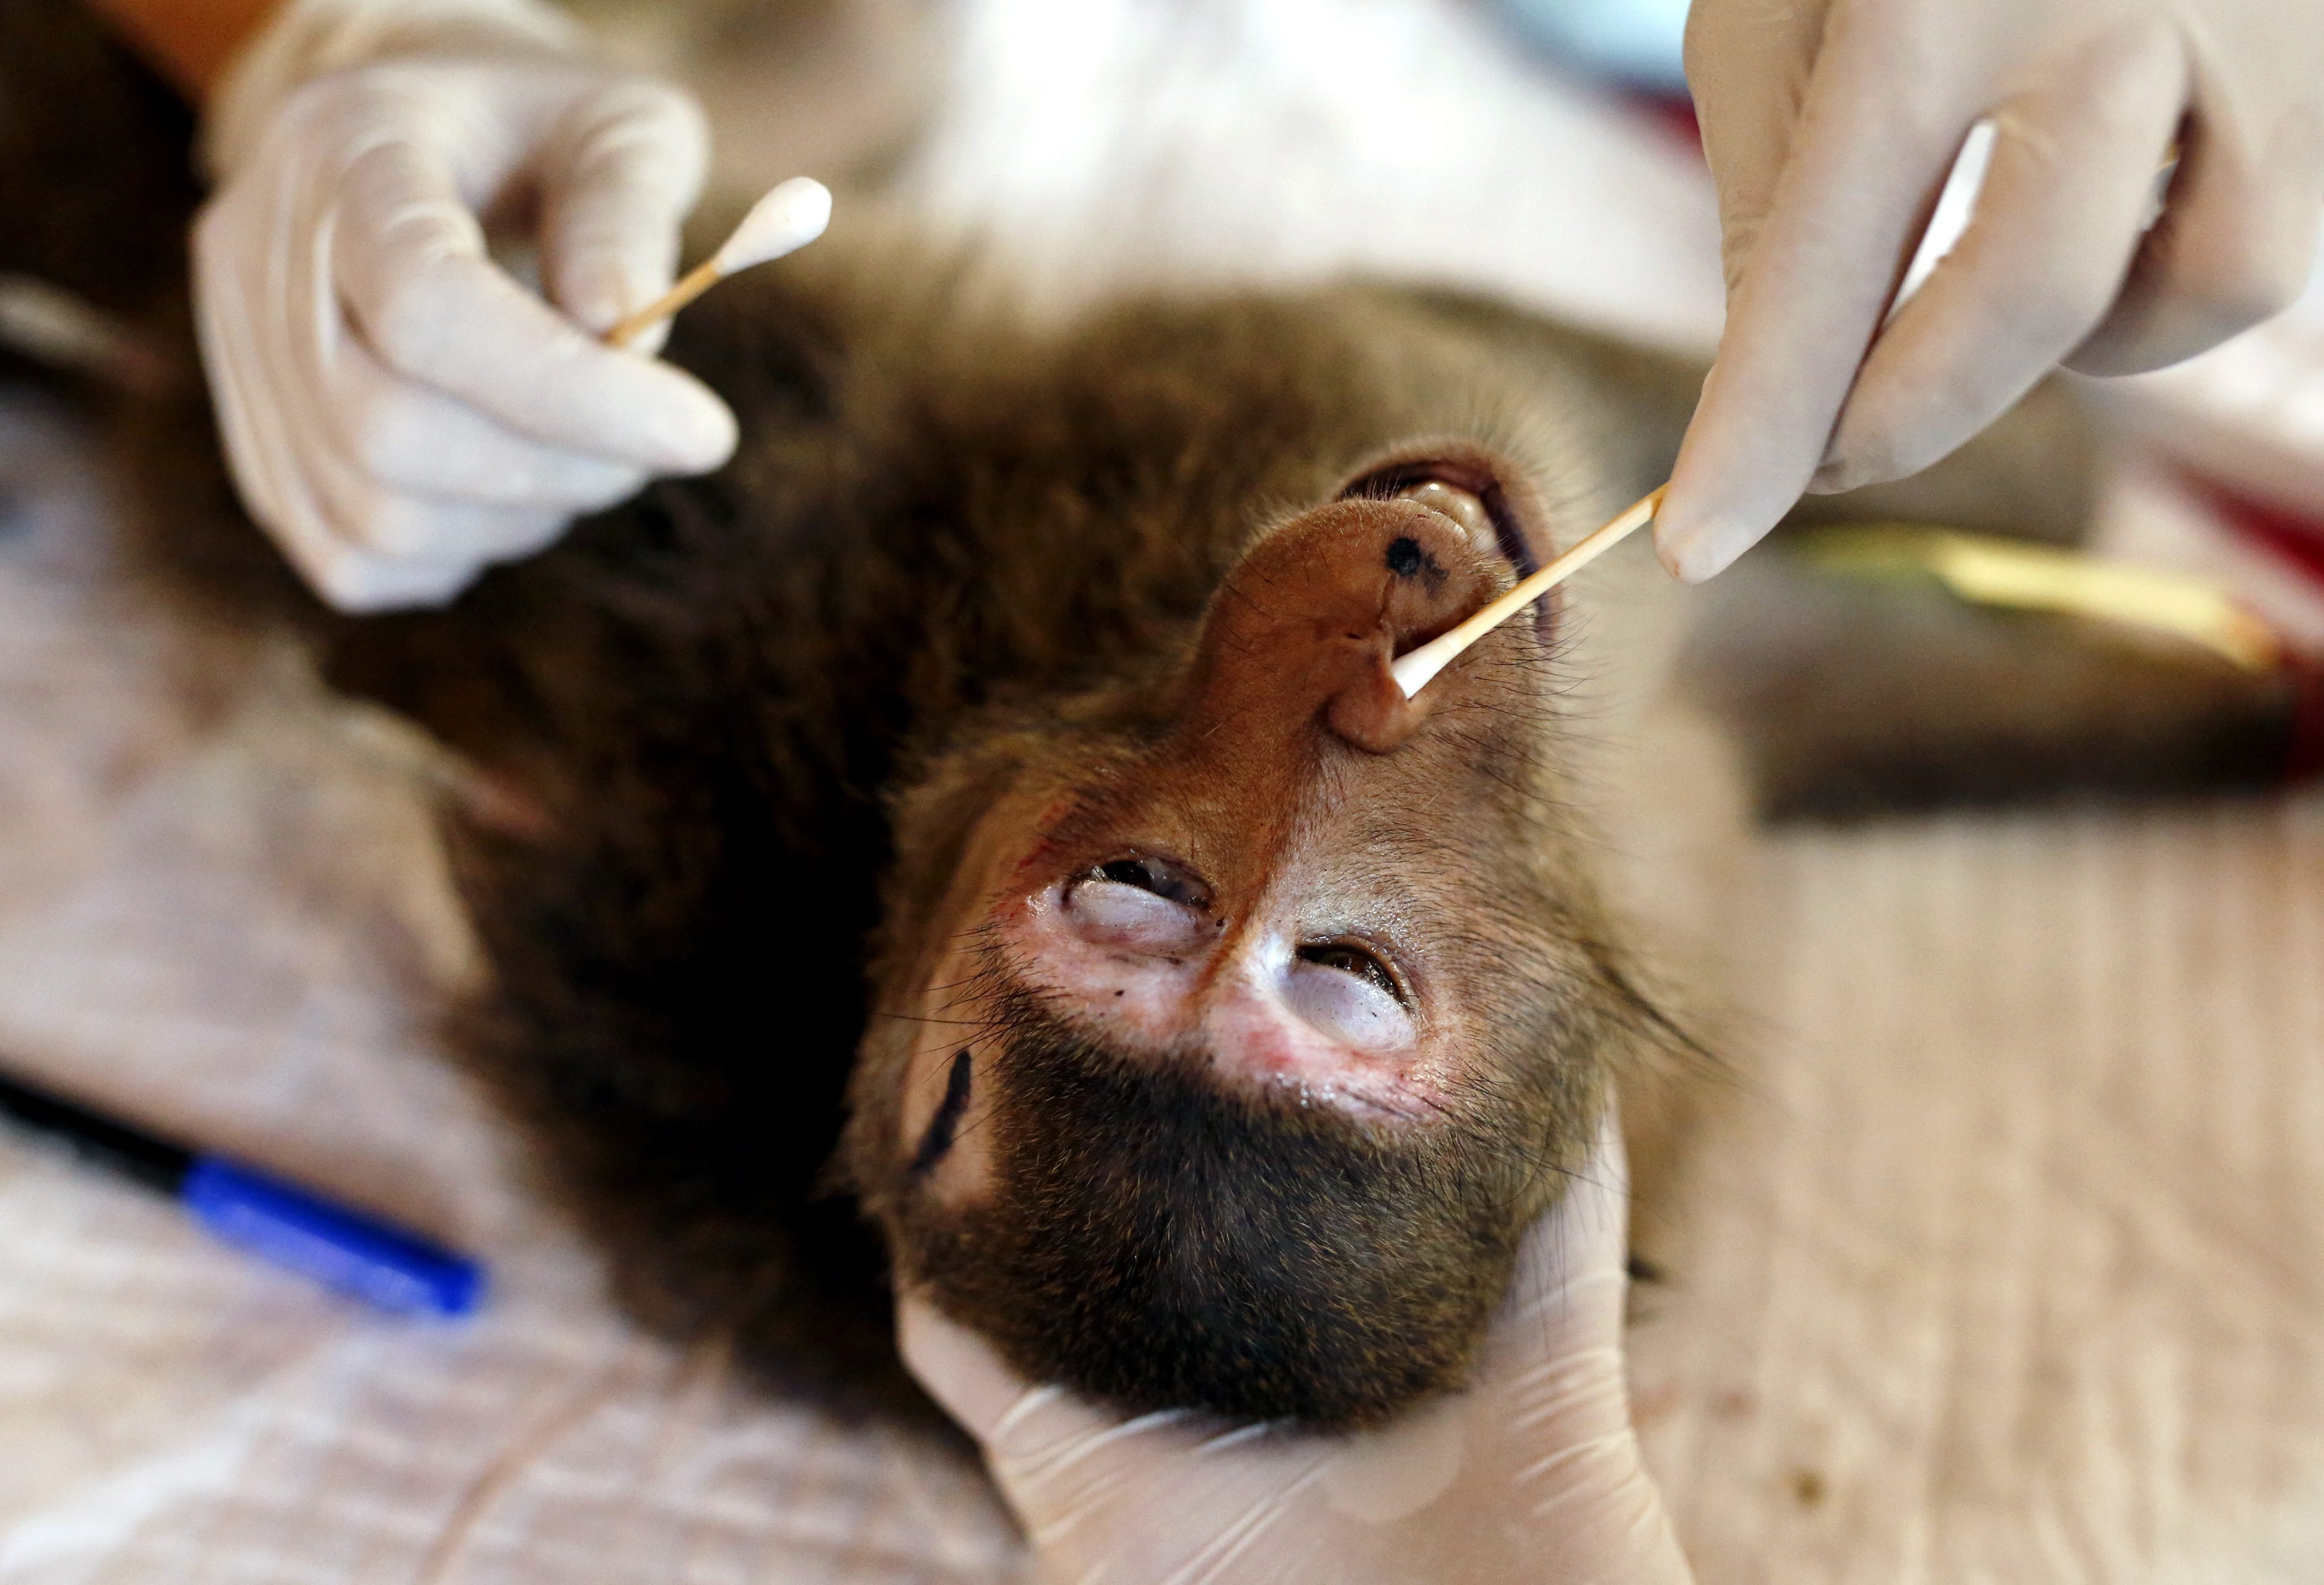 A Thai veterinarian takes a DNA sample from an unconscious wild monkey during a health treatment program at Phra Nakhon Khiri Historical Park in Phetchaburi province, Thailand, on April 5, 2016.